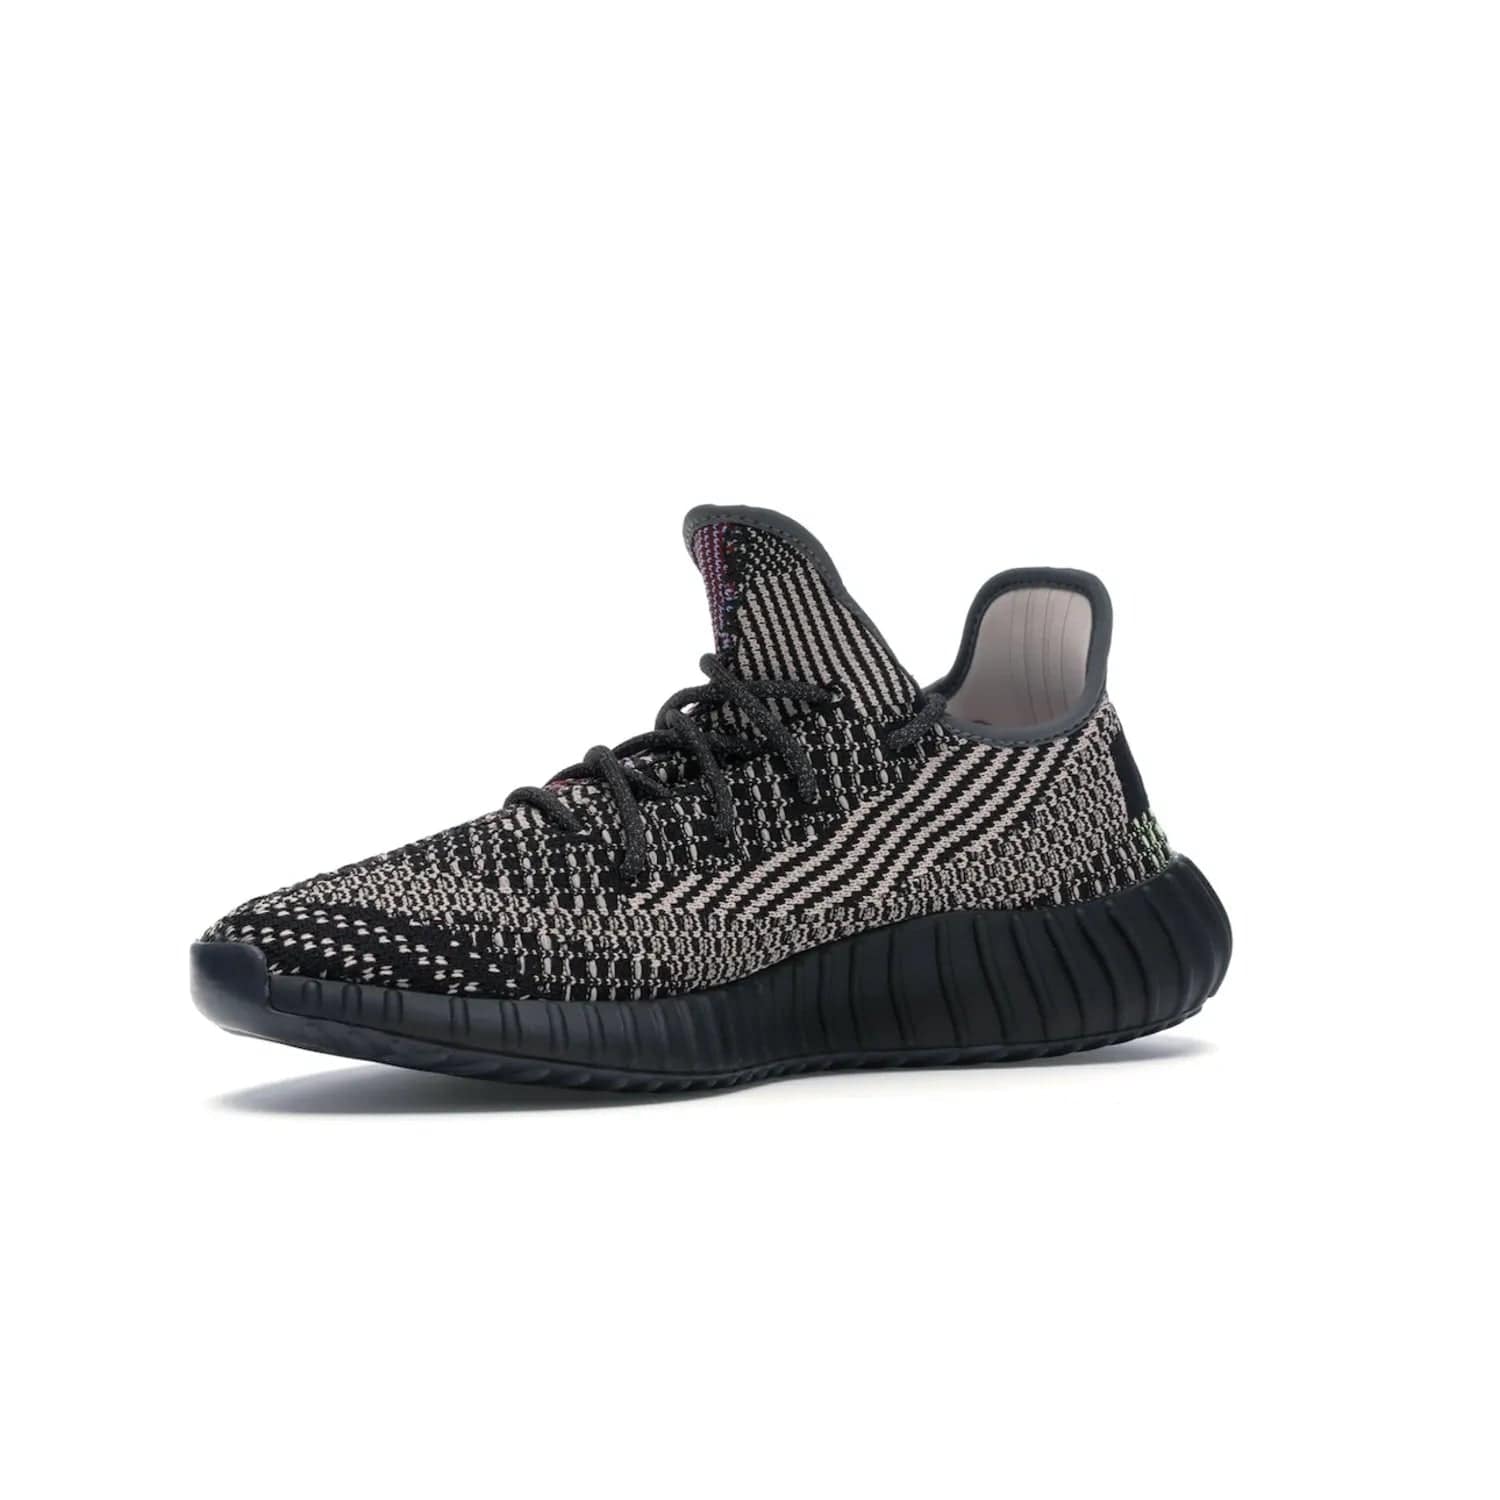 adidas Yeezy Boost 350 V2 Yecheil (Non-Reflective) - Image 16 - Only at www.BallersClubKickz.com - Make a statement with the eye-catching adidas Yeezy Boost 350 V2 Yecheil Non-Reflective. Featuring a spectrum of colorful hues, black upper, Boost cushioning, and black side stripe, the sneaker brings a luxe yet playful finish to any outfit.